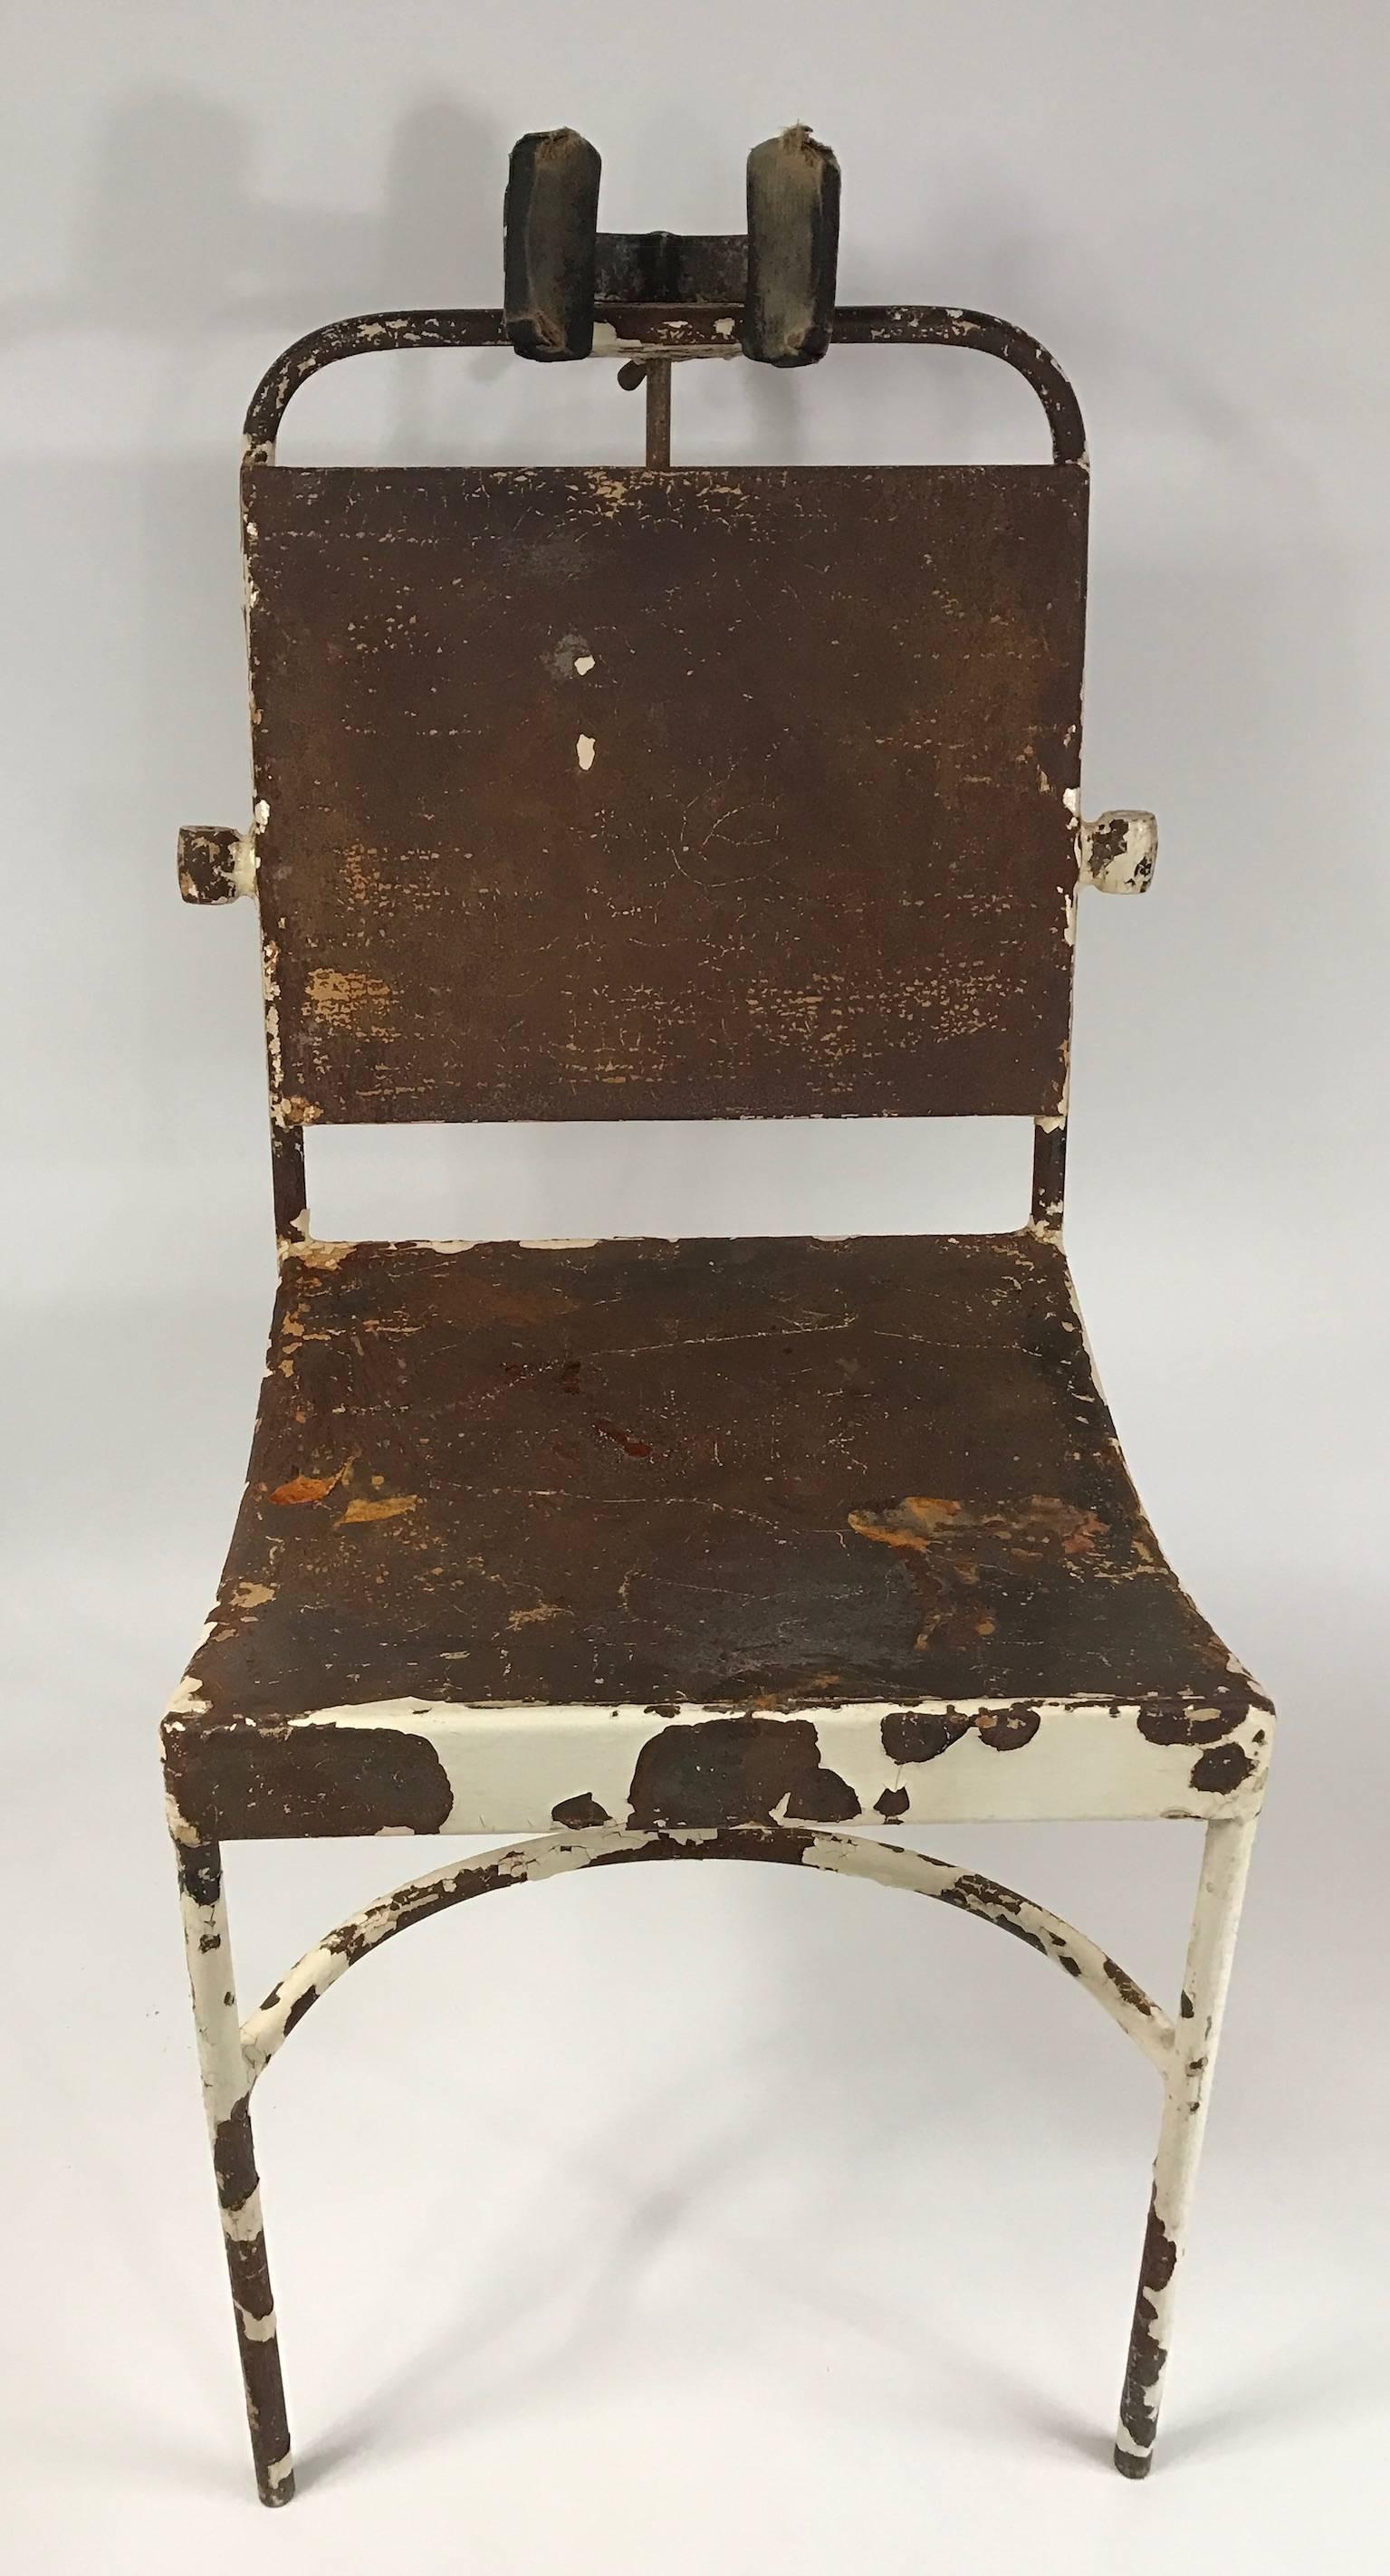 Interesting antique medical chair. Original untouched condition showing iron frame through distressed white paint. The headrest adjusts vertically.